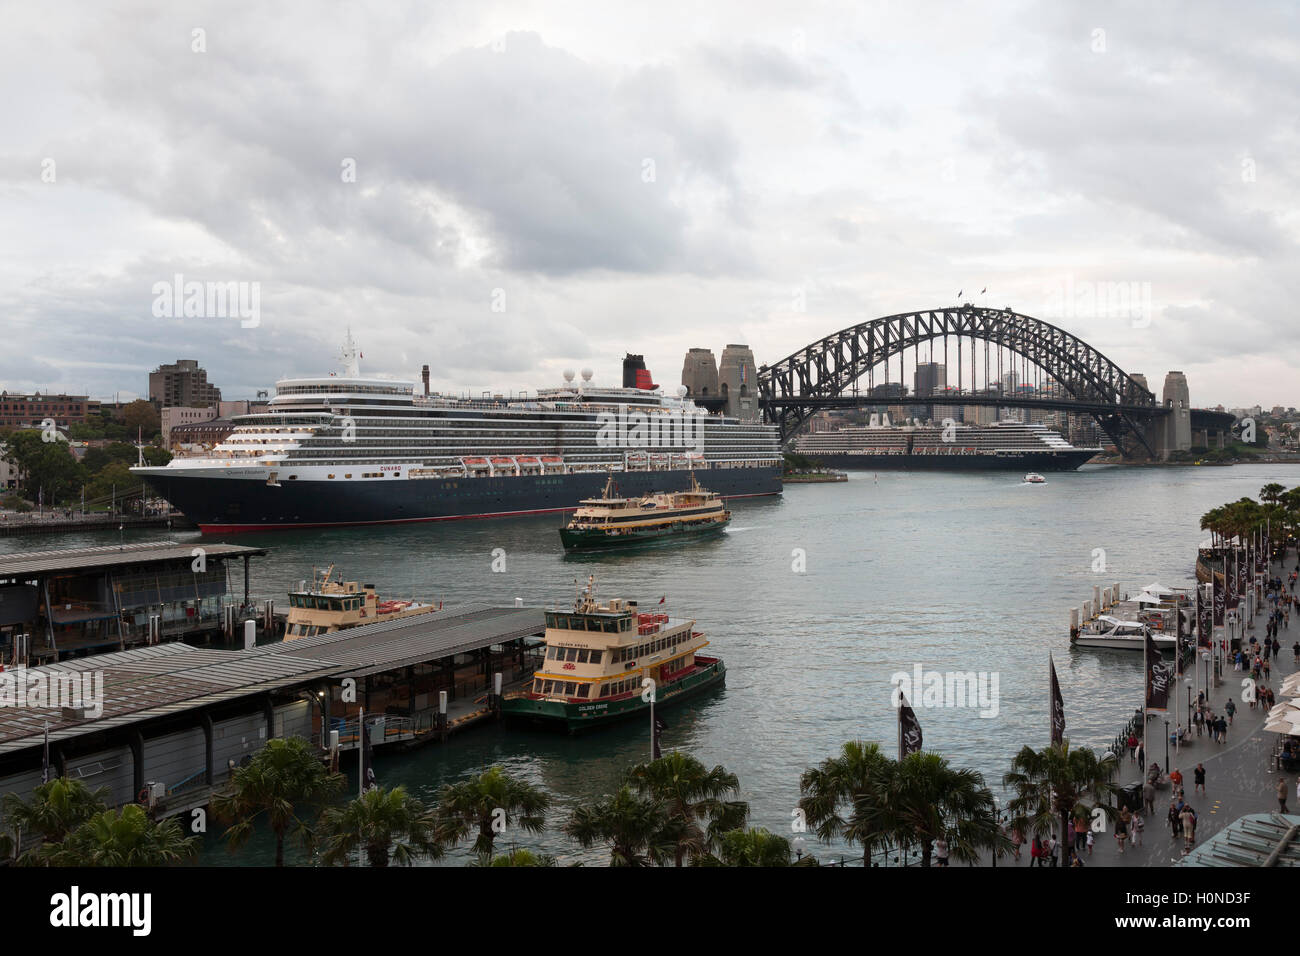 The MS Queen Elizabeth is a Vista-class cruise ship berthed at the Overseas Passenger Terminal Sydney Australia Stock Photo